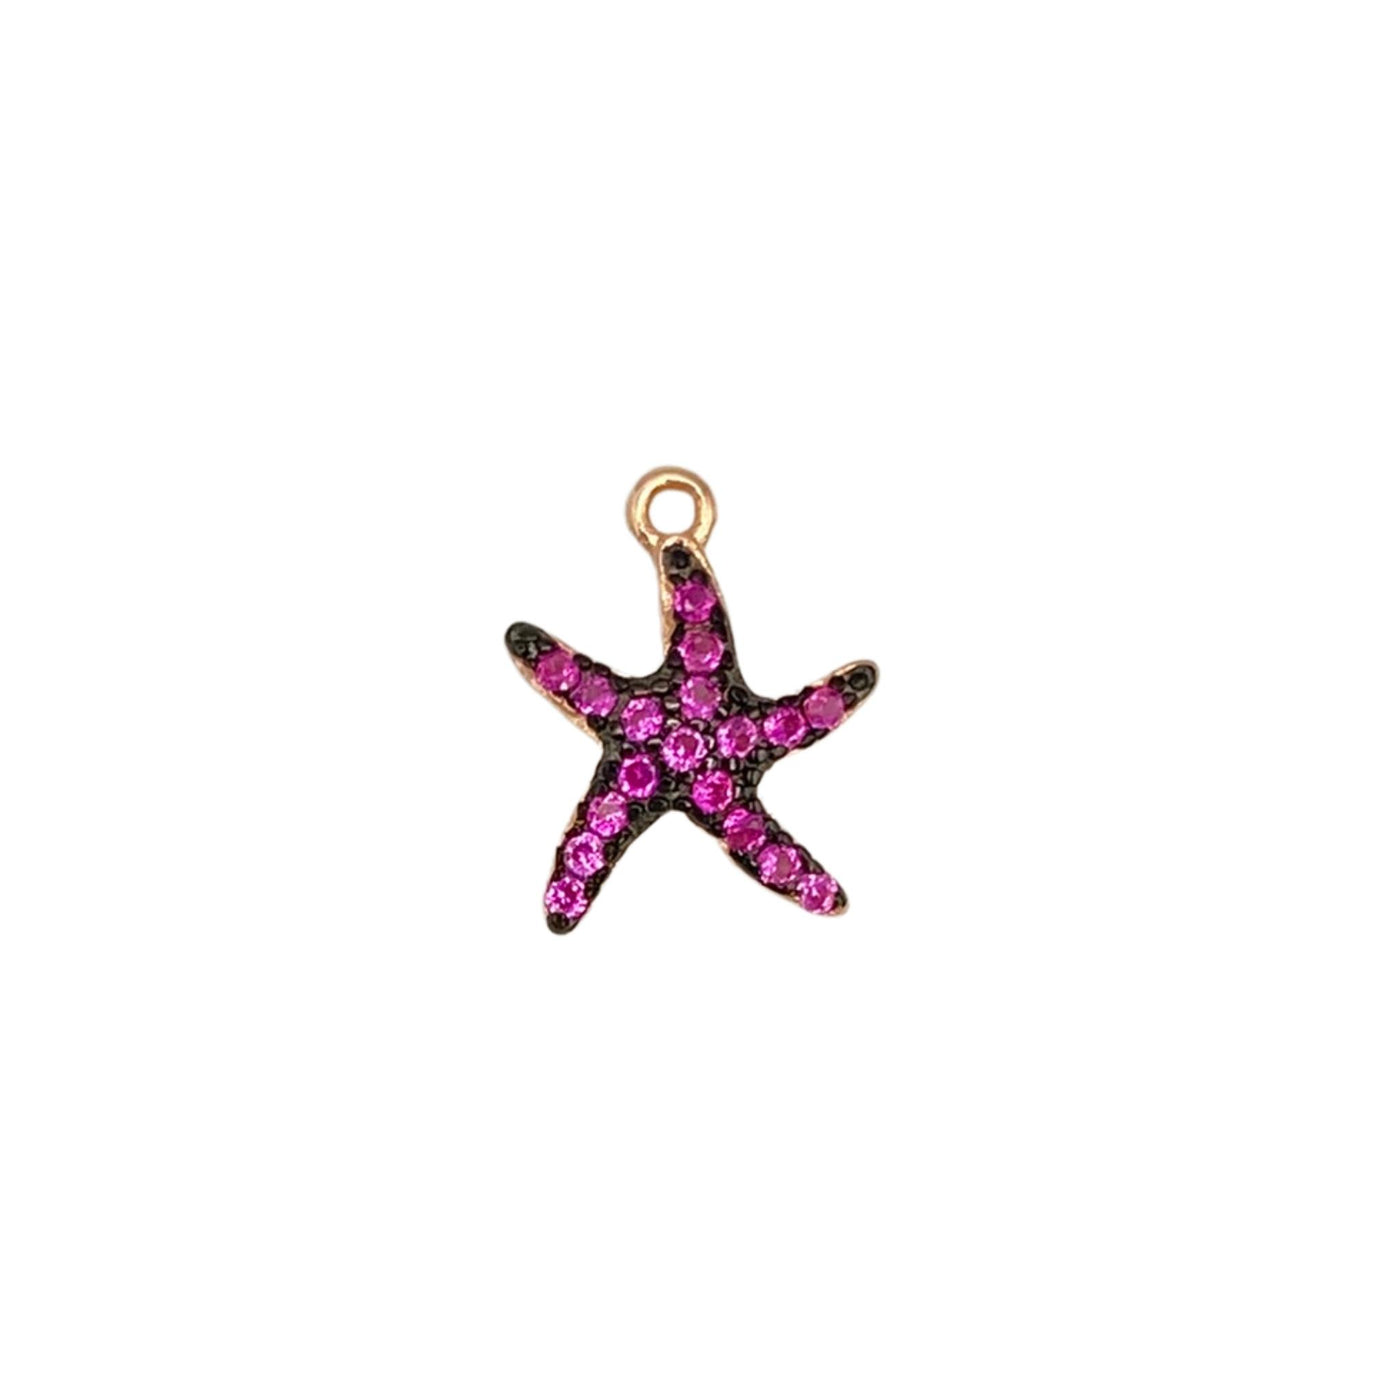 Pack of 5 Starfish pendants in silver - 8.7 mm